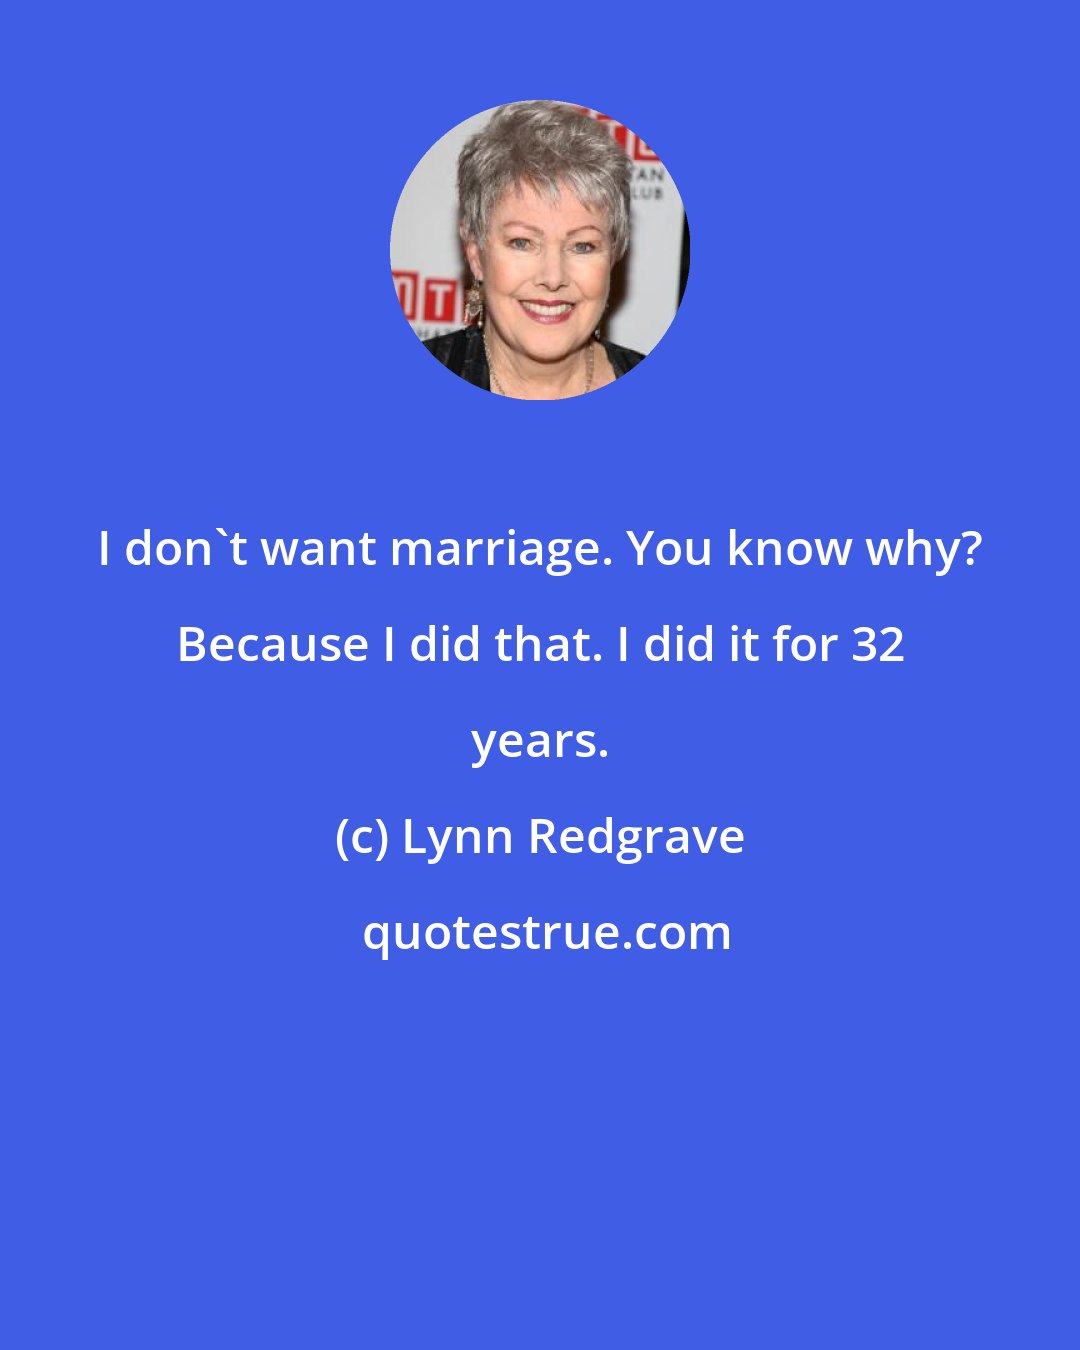 Lynn Redgrave: I don't want marriage. You know why? Because I did that. I did it for 32 years.